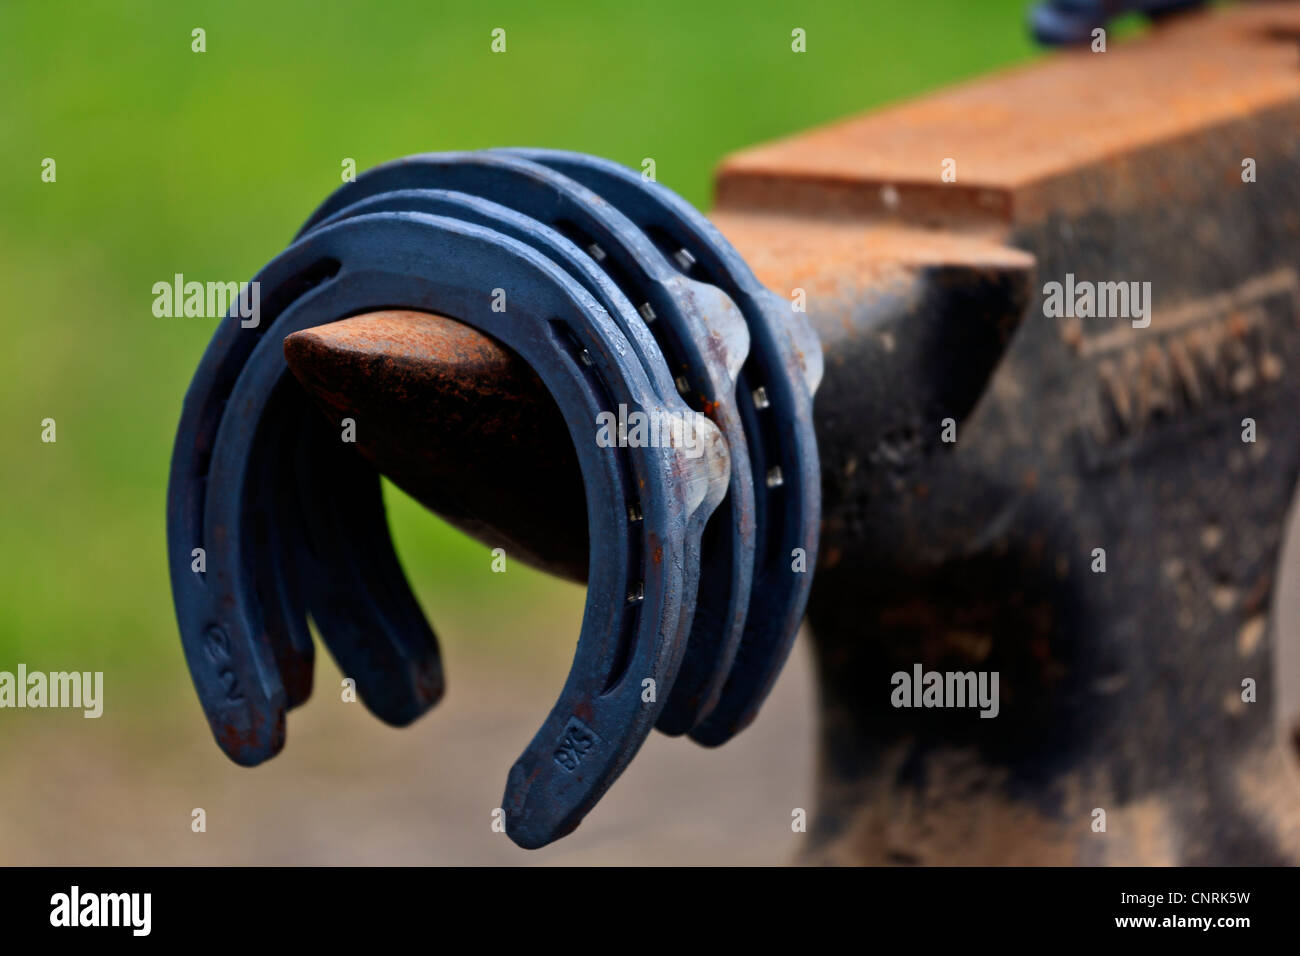 Horse shoes on farriers anvil Stock Photo